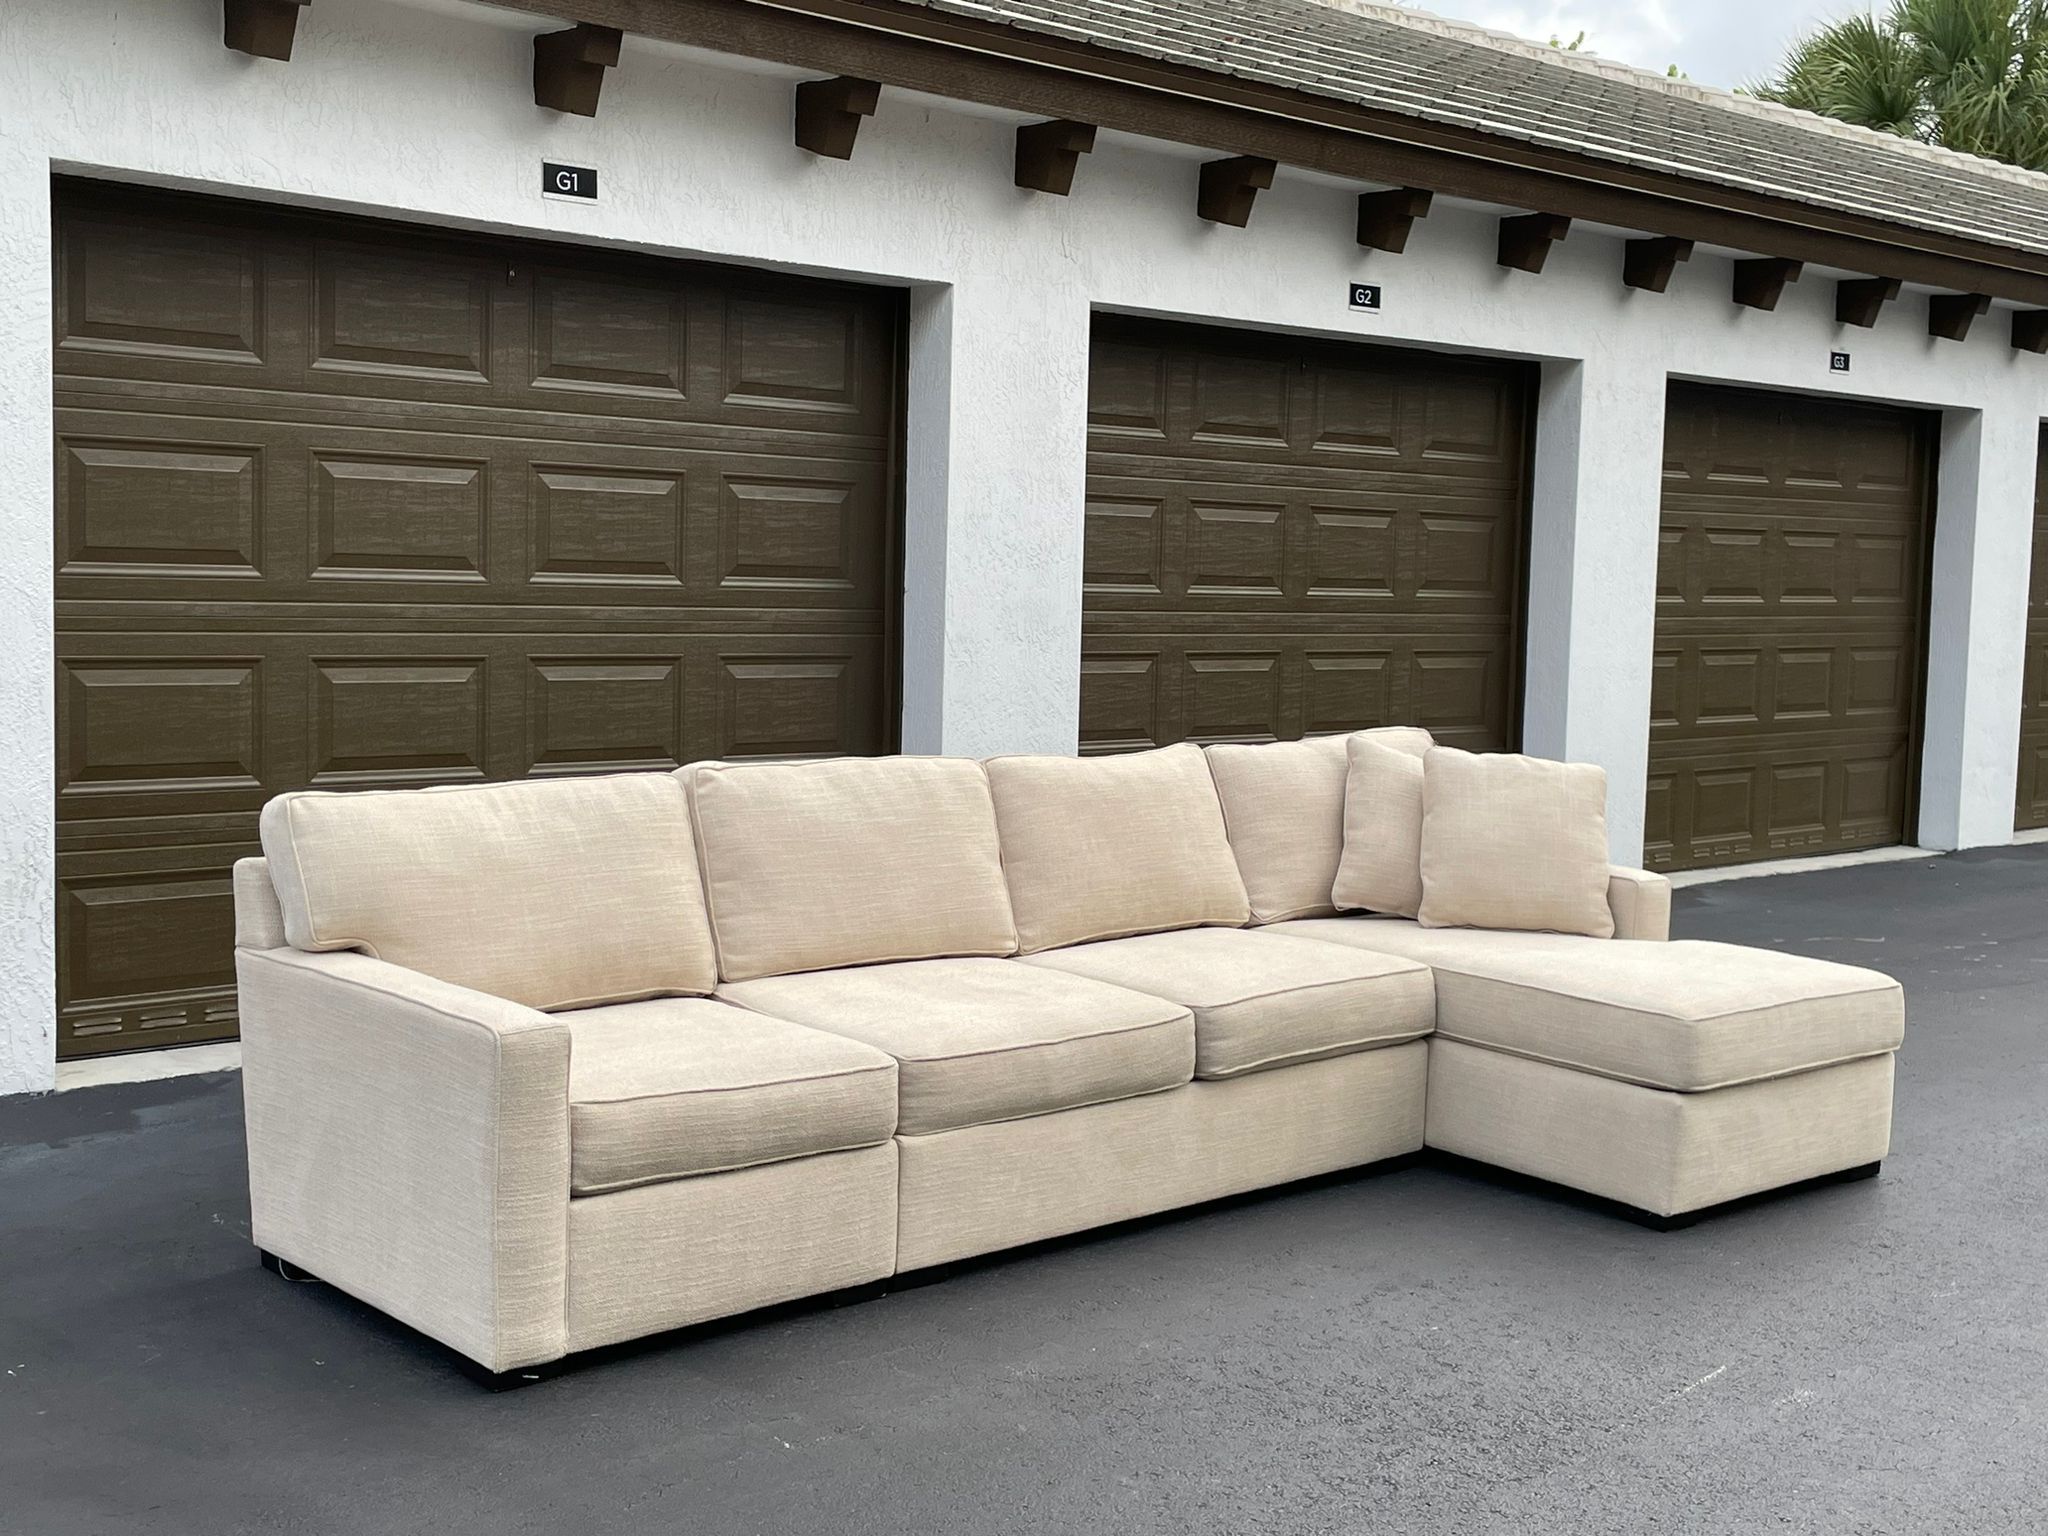 Sofa/Couch Sectional - Beige - Fabric - Delivery Available 🚛